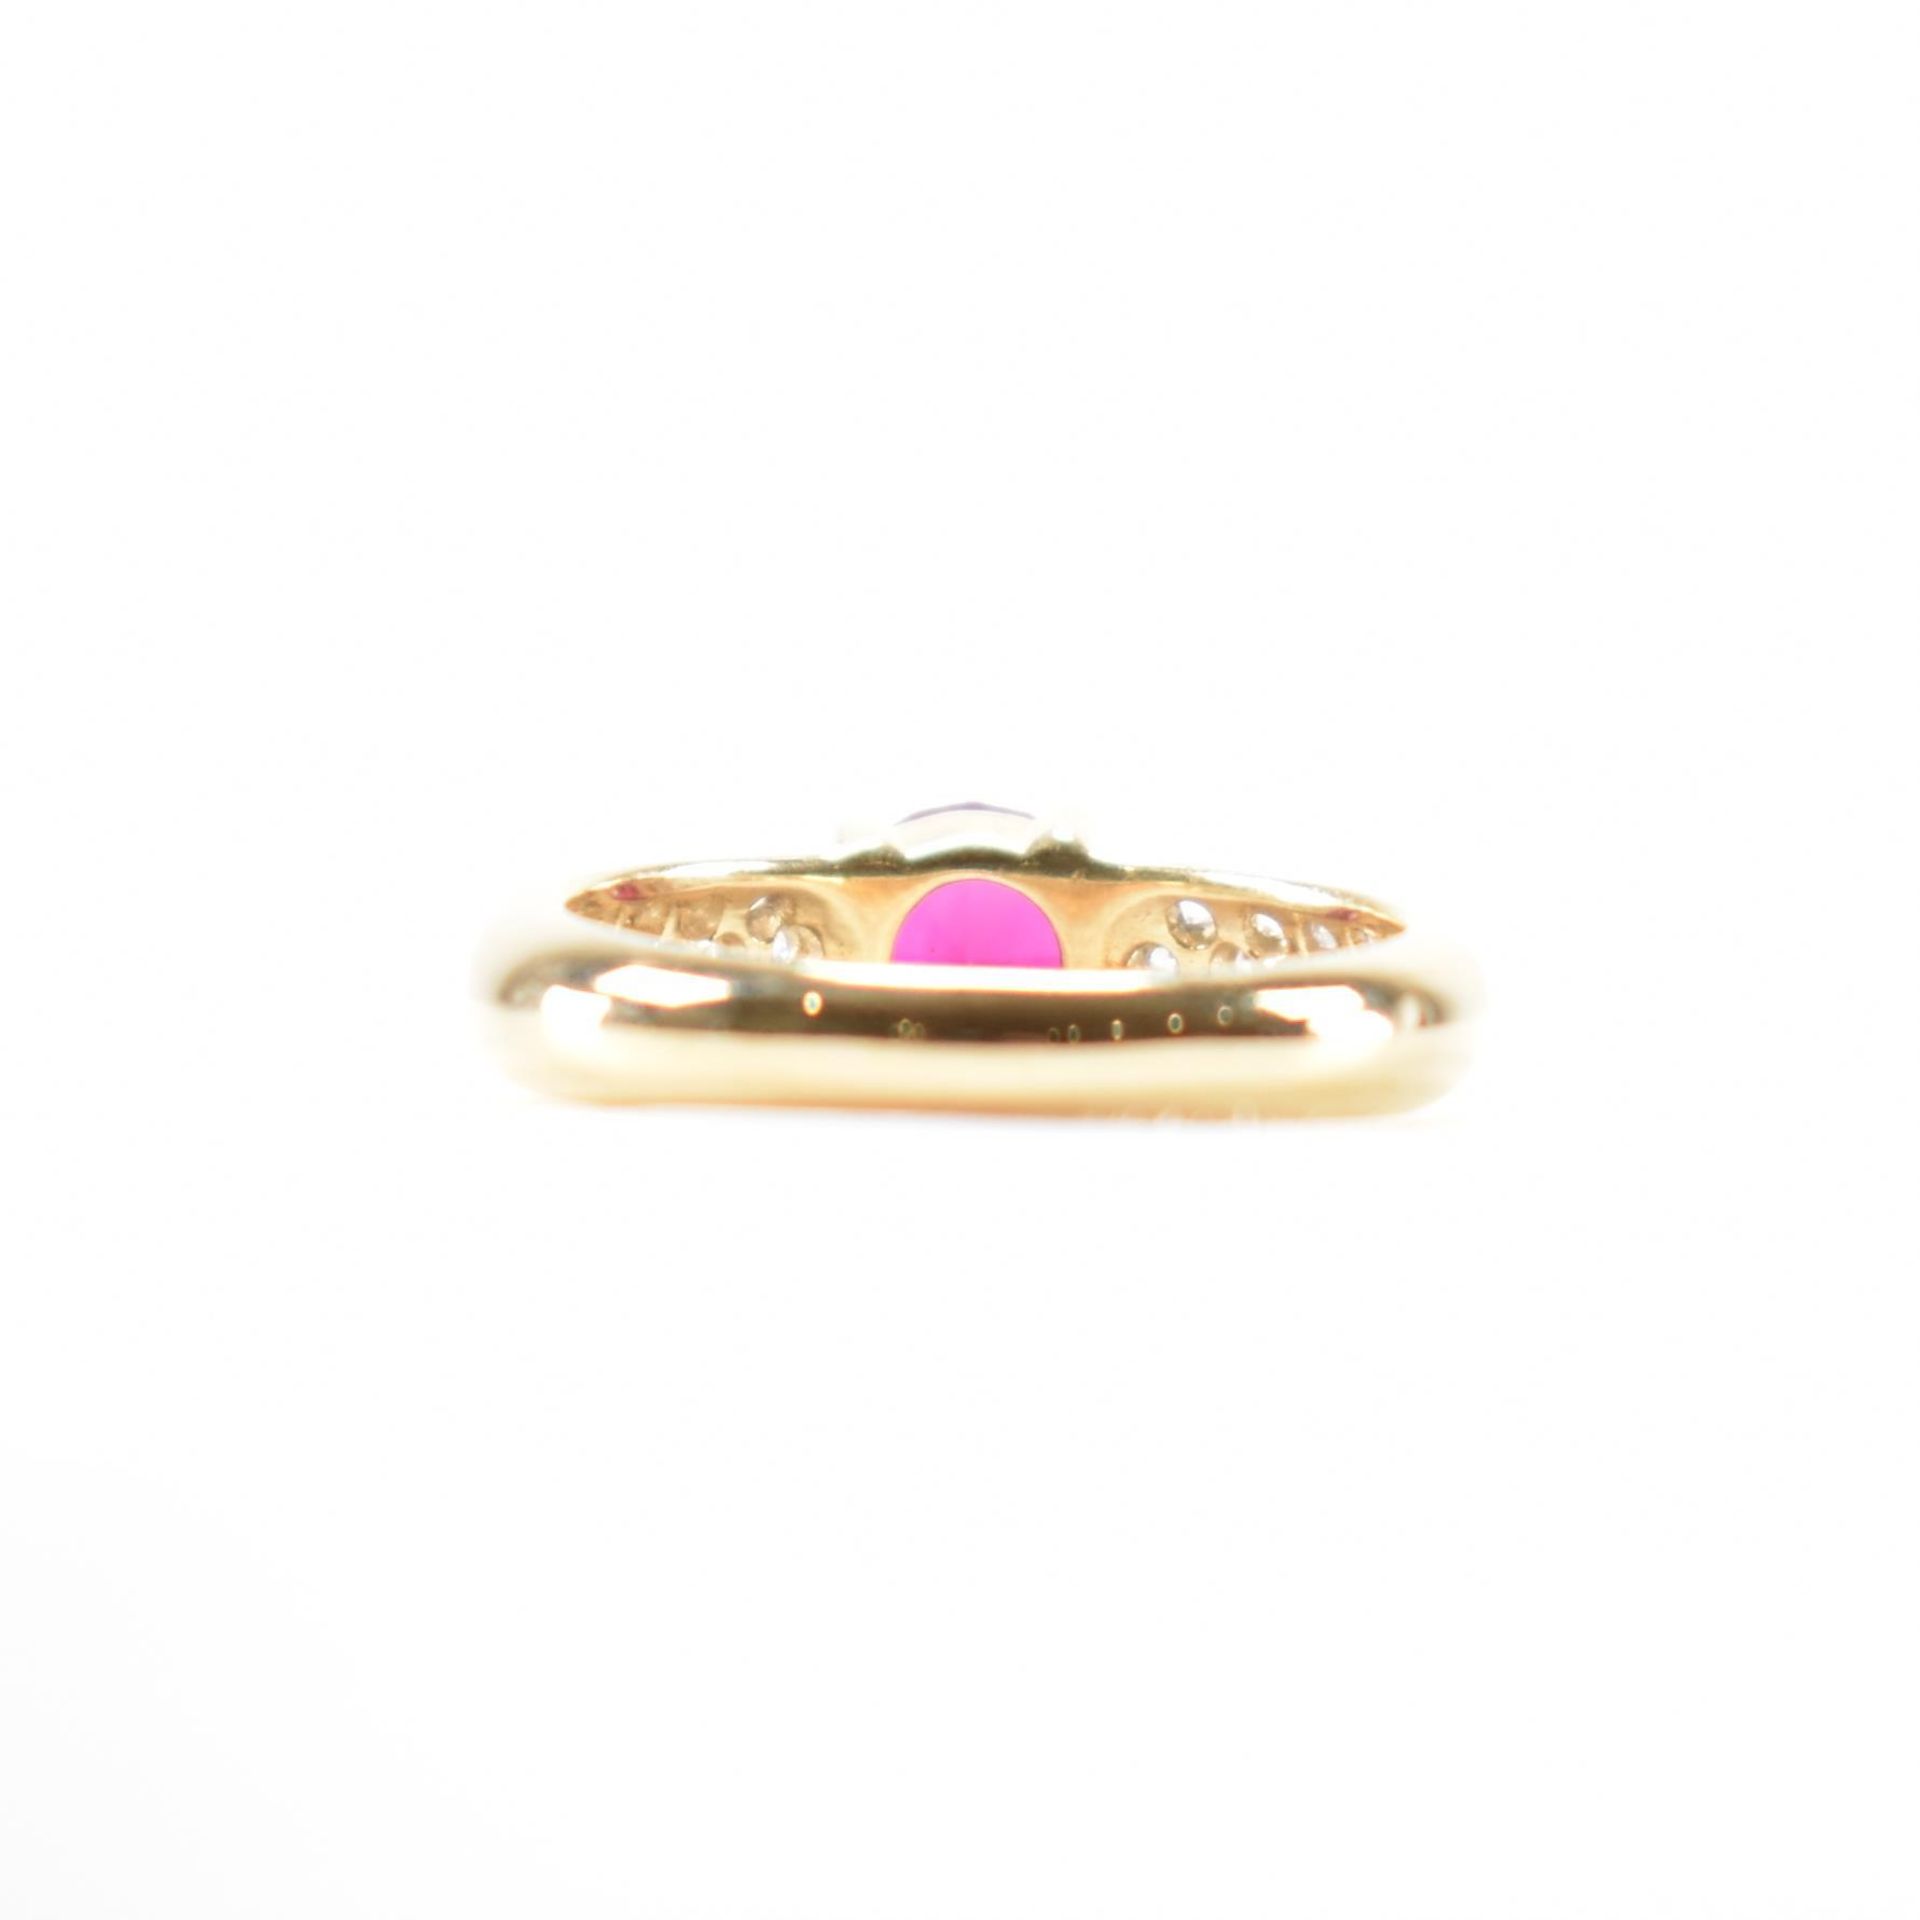 HALLMARKED 9CT GOLD SYNTHETIC RUBY & CZ RING - Image 3 of 7